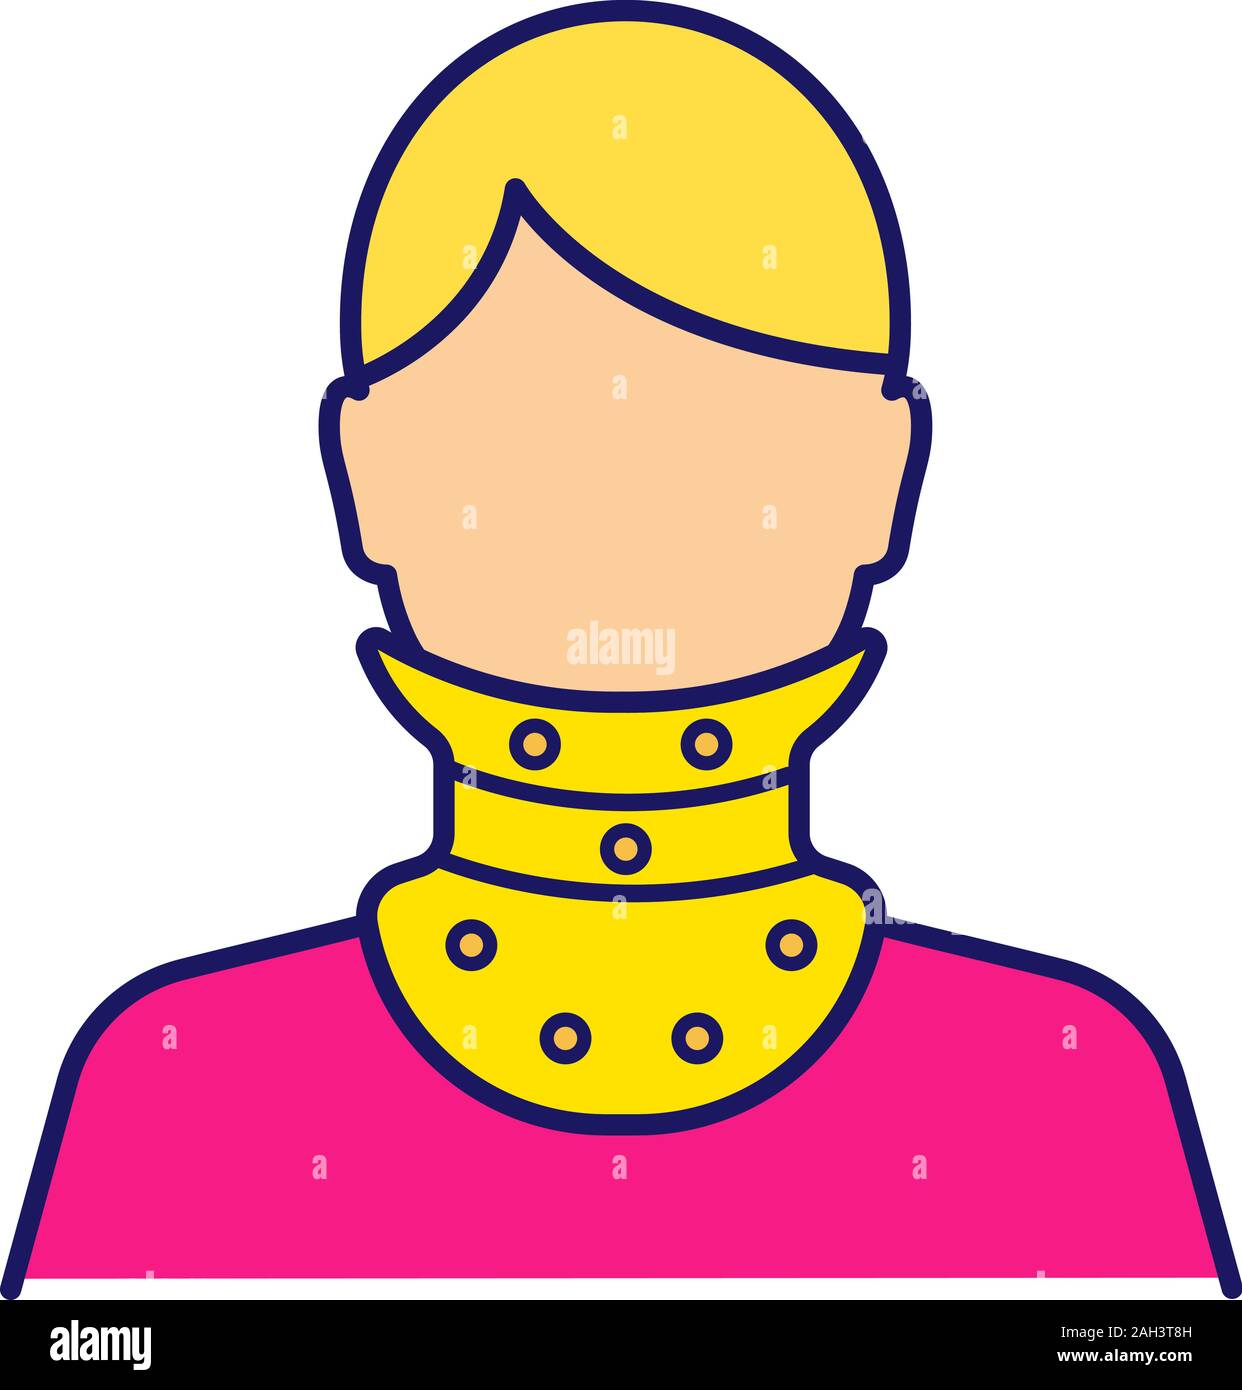 Cervical collar color icon. Neck brace. Medical plastic neck support. Orthopedic collar. Traumatic head and neck injuries treatment. Isolated vector i Stock Vector